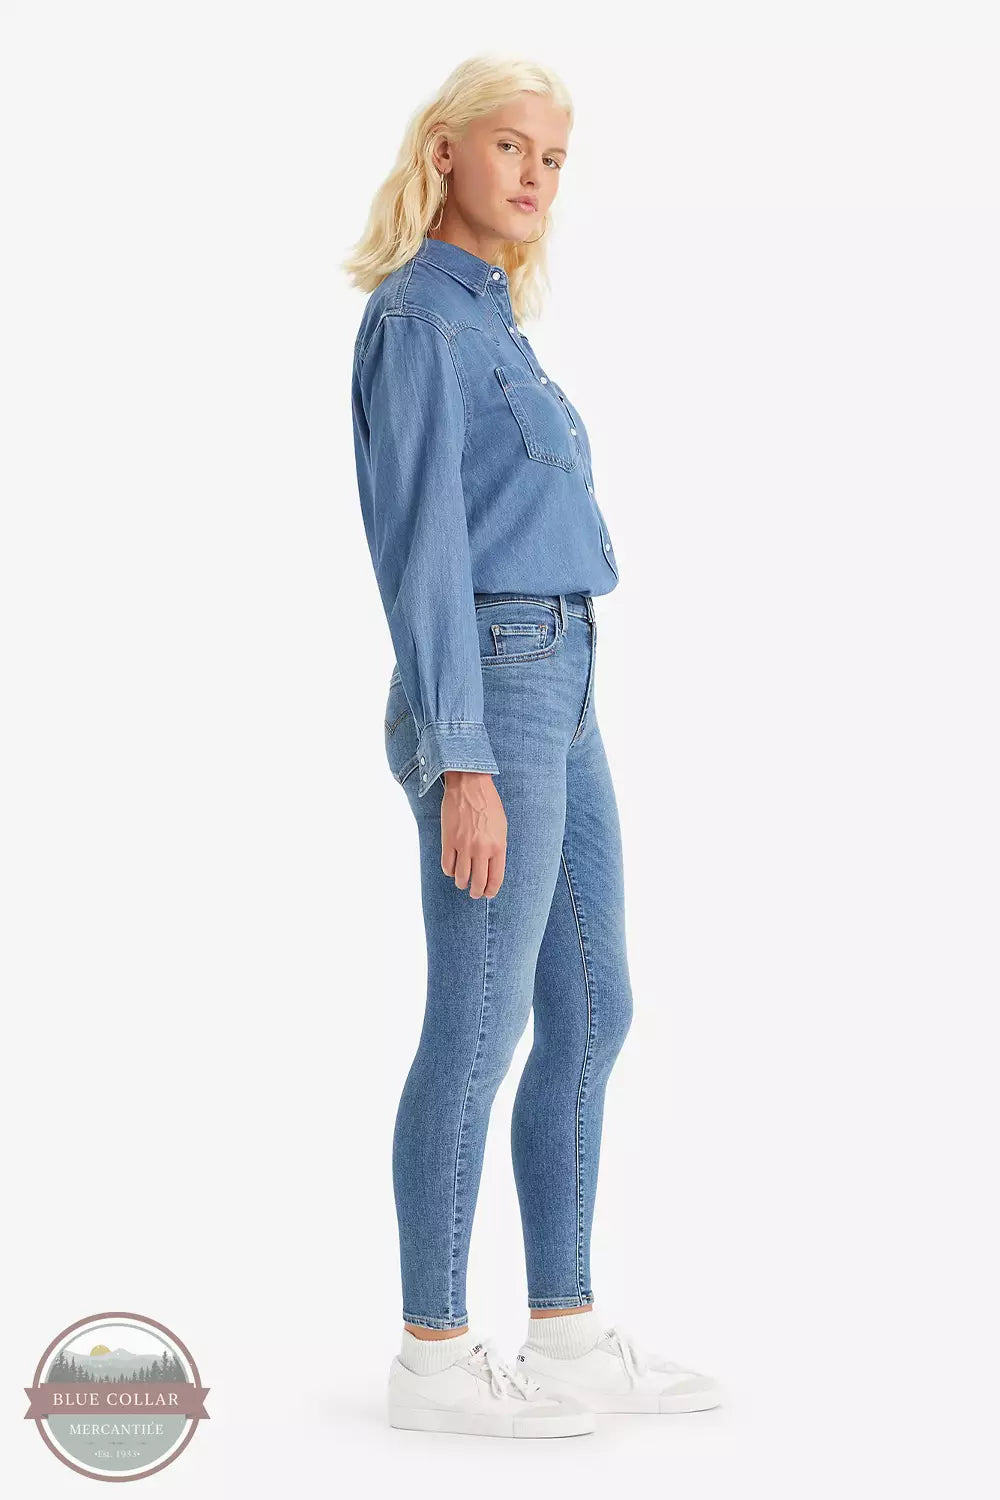 Levi's 52797-0396 720 High Rise Super Skinny Jeans Side View